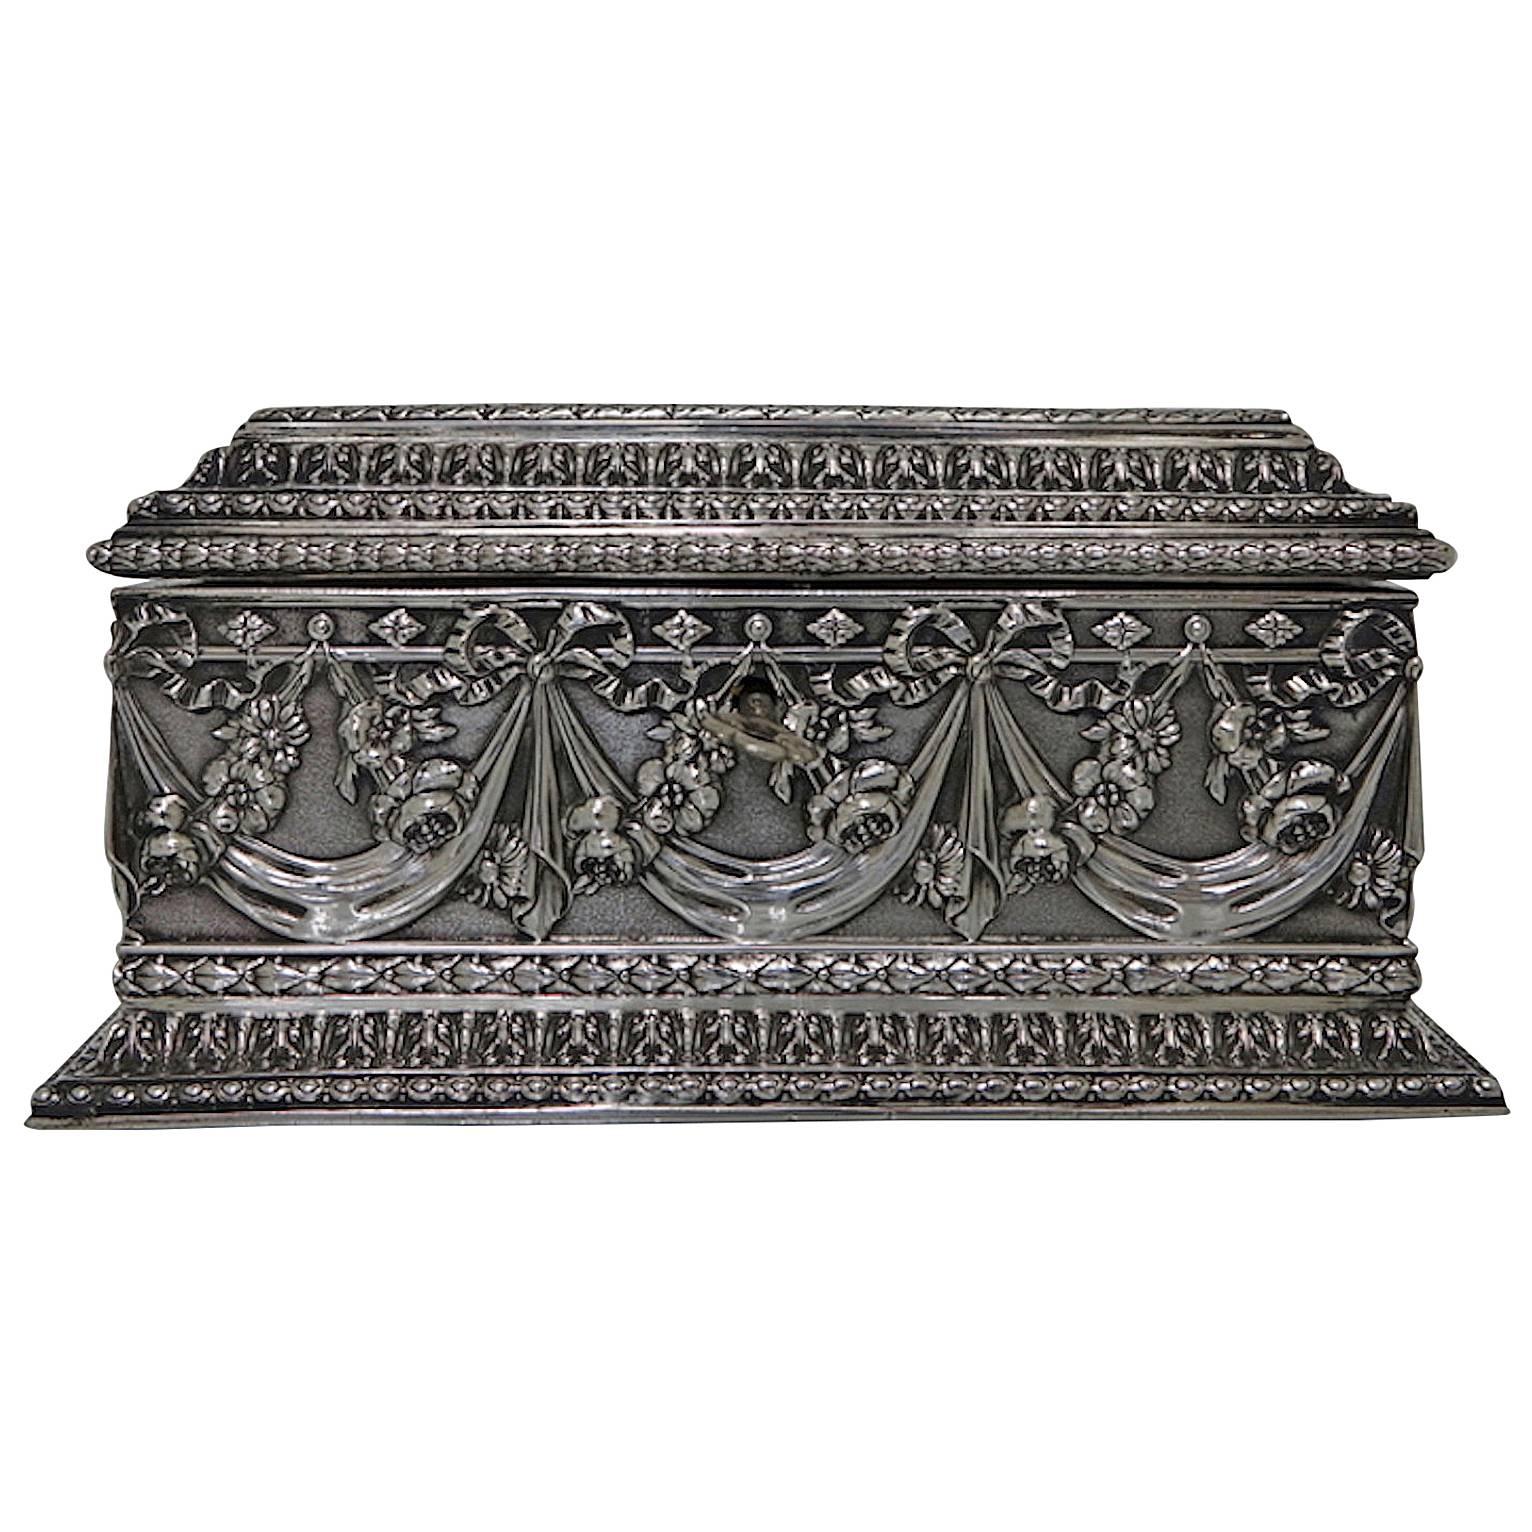 Antique Silver French Jewelry Casket, circa 1880